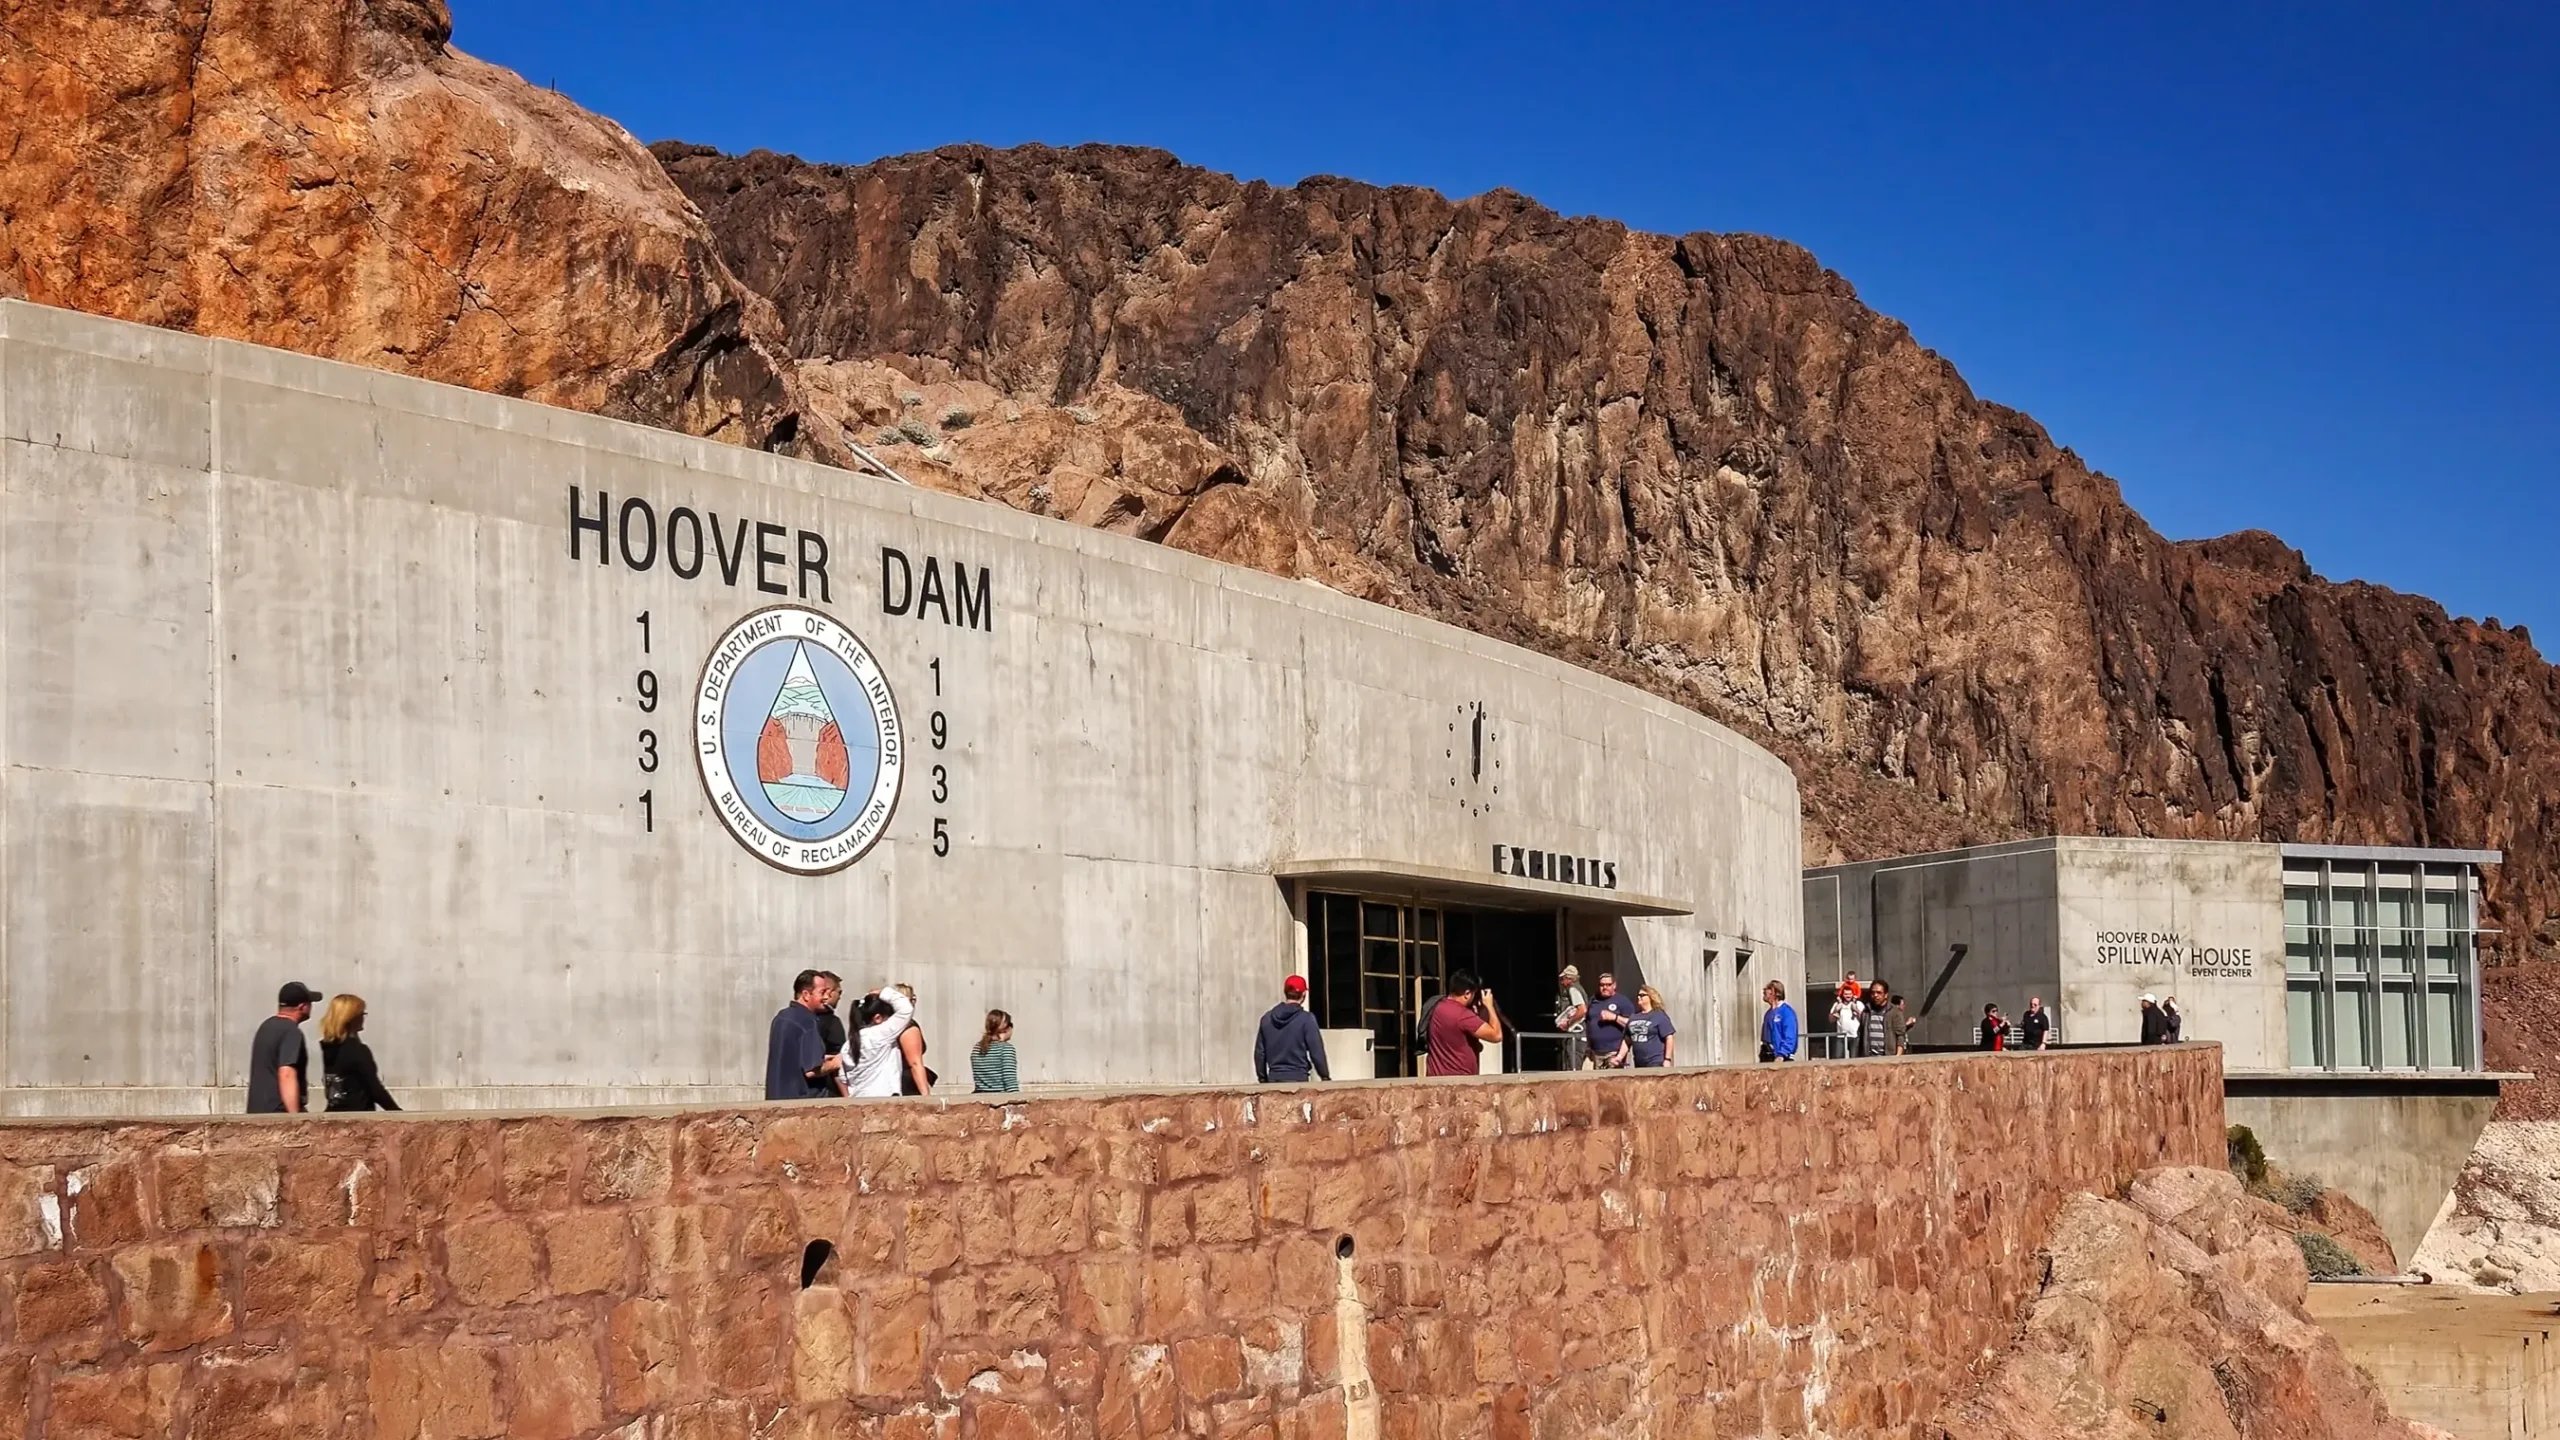 Hoover dam Exhibits scaled